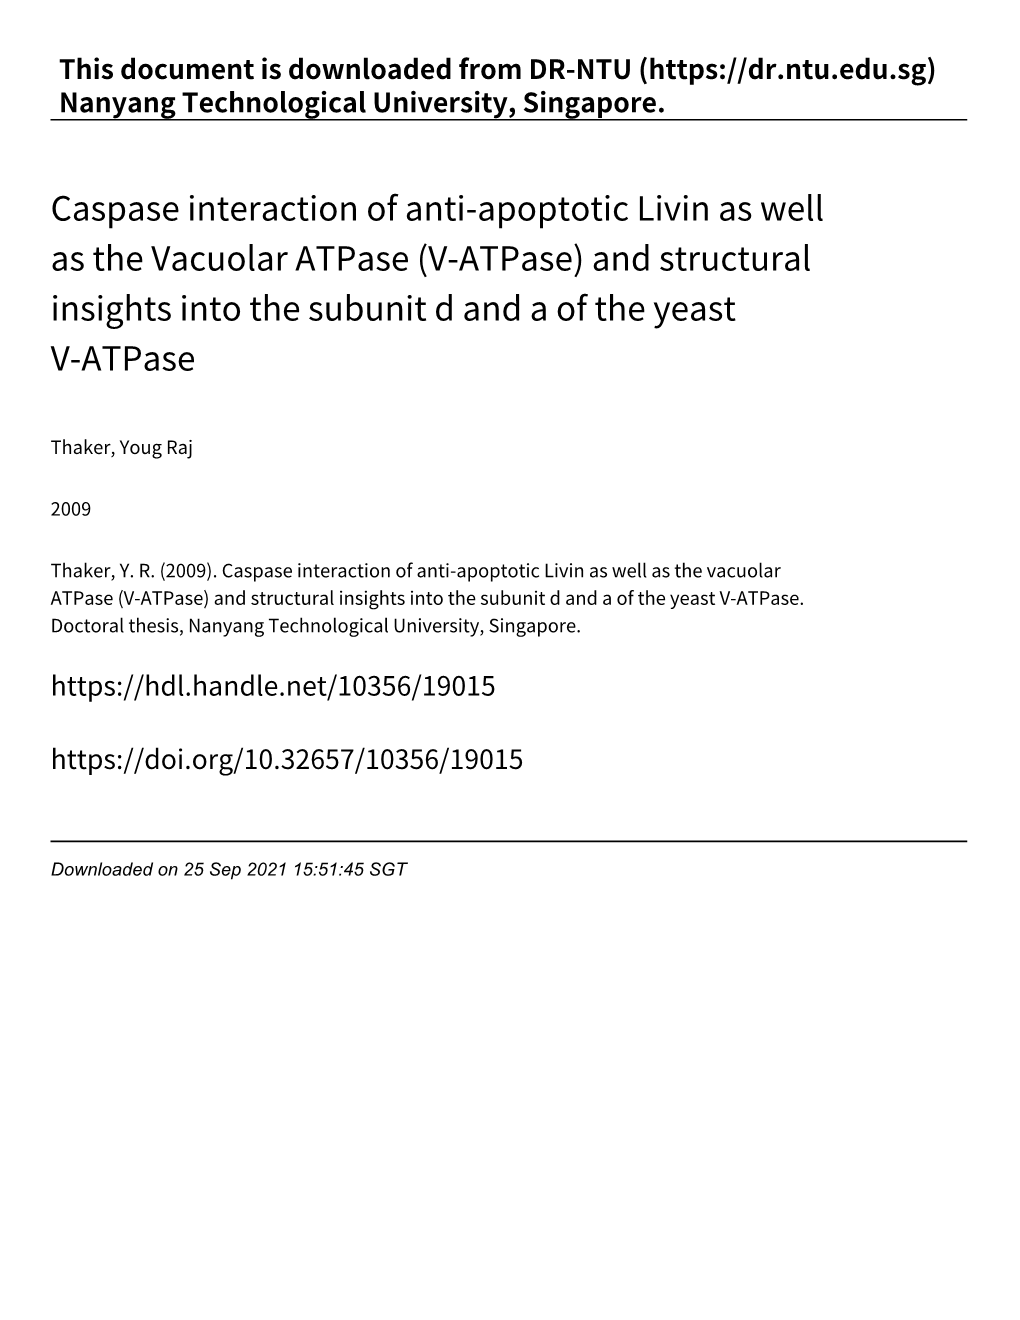 Caspase Interaction of Anti‑Apoptotic Livin As Well As the Vacuolar Atpase (V‑Atpase) and Structural Insights Into the Subunit D and a of the Yeast V‑Atpase